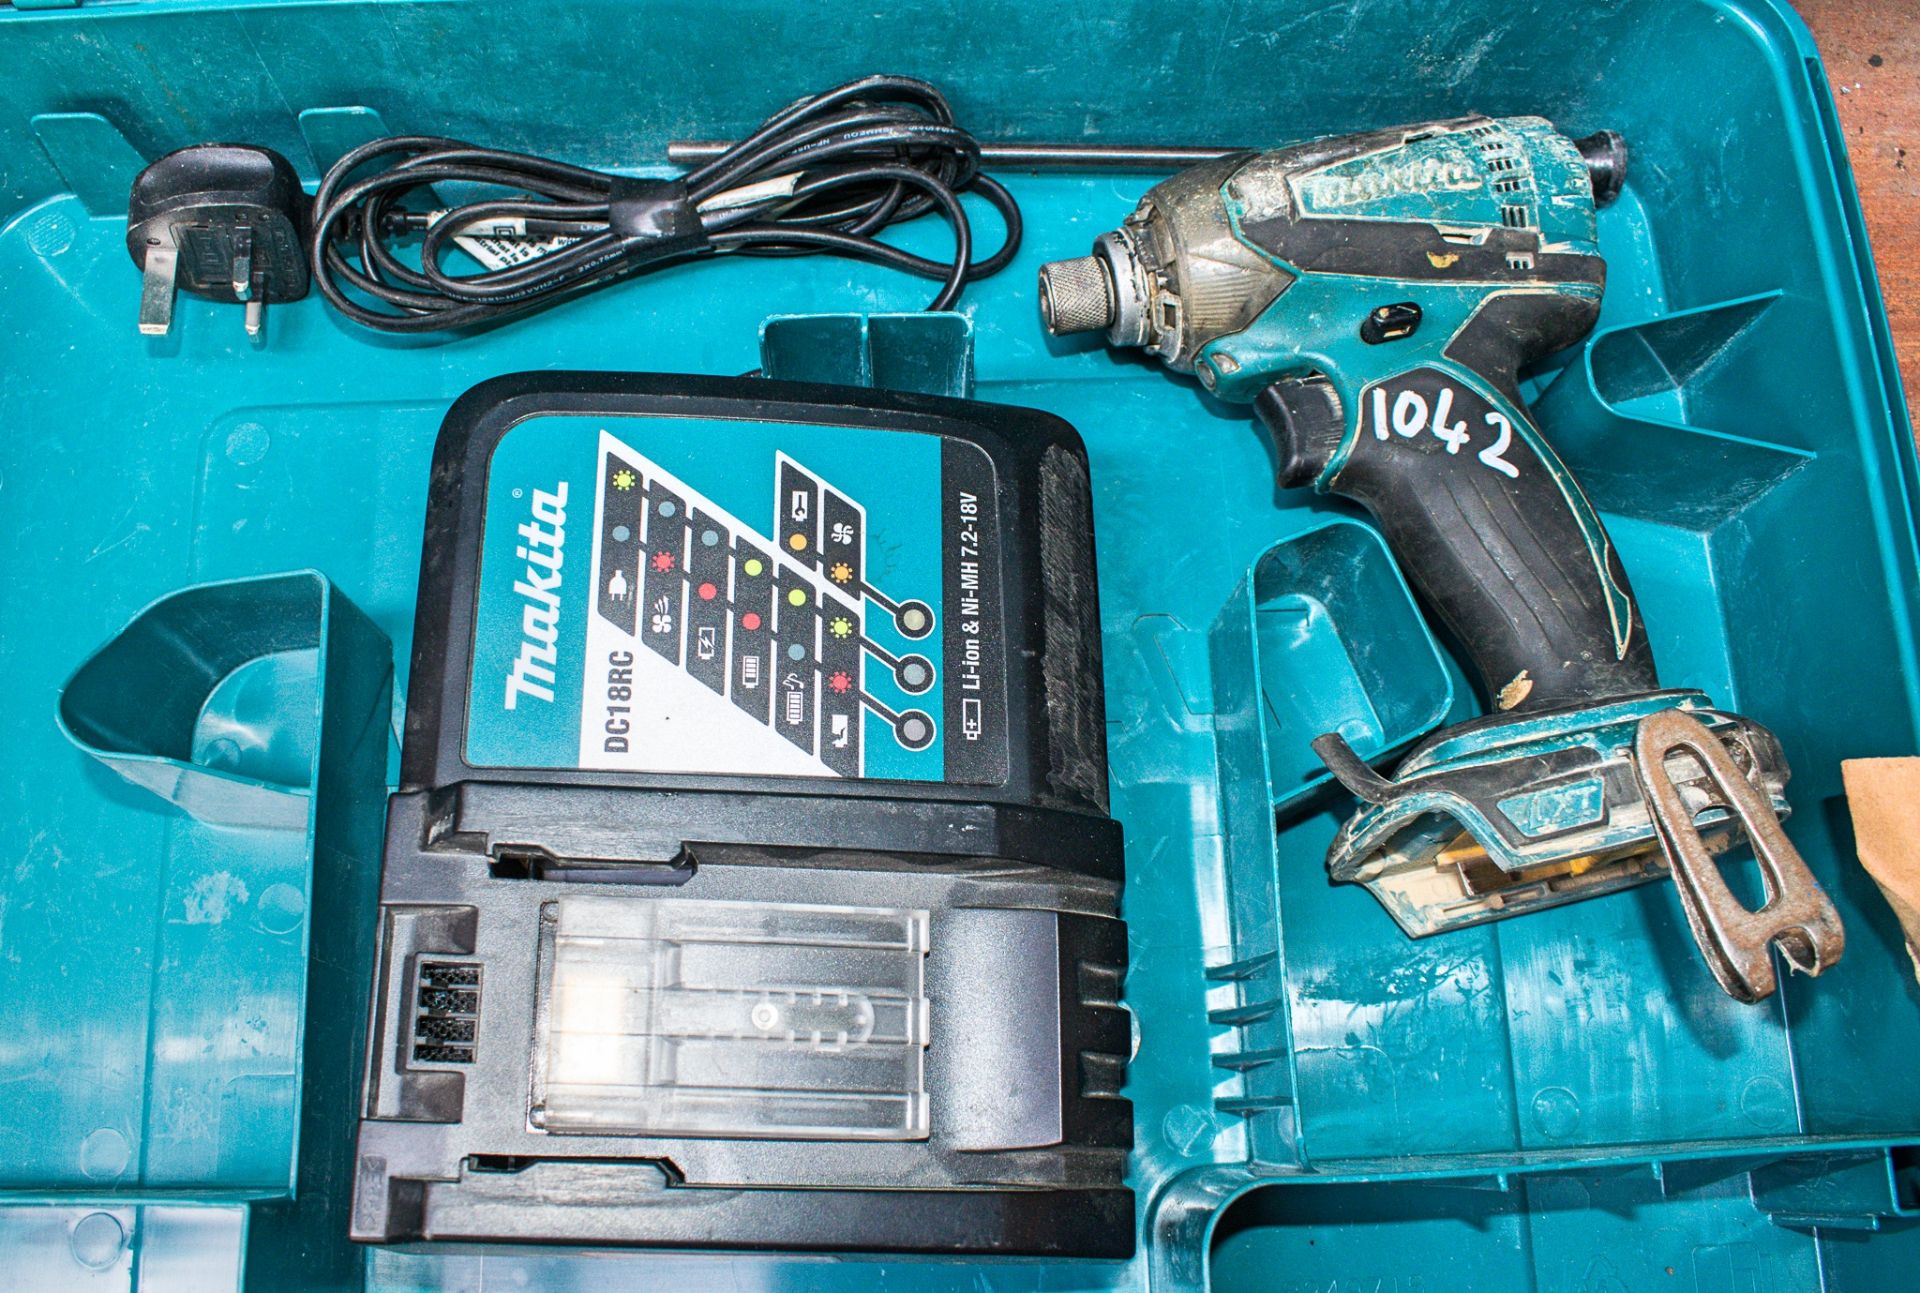 Makita 18v cordless screw gun c/w charger & carry case A700897 ** No battery **